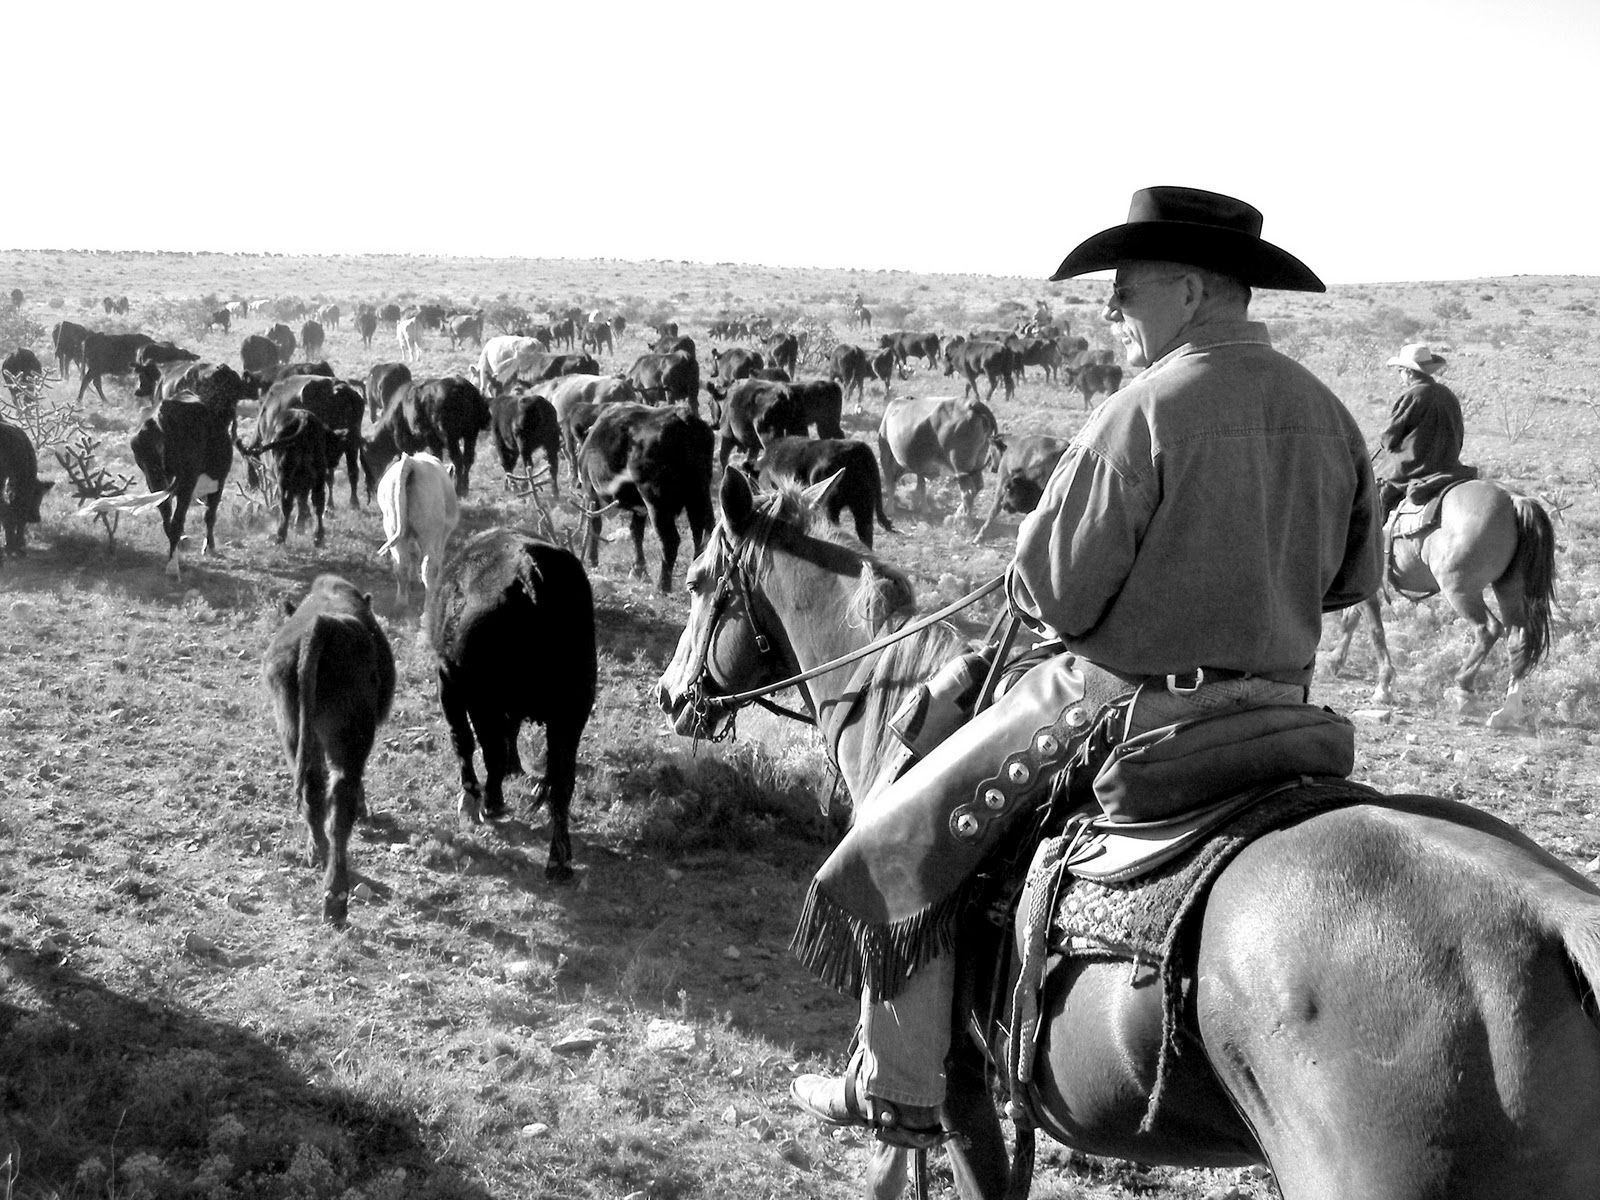 Cattle drive | The Great State of Texas | Pinterest | Cattle drive ...